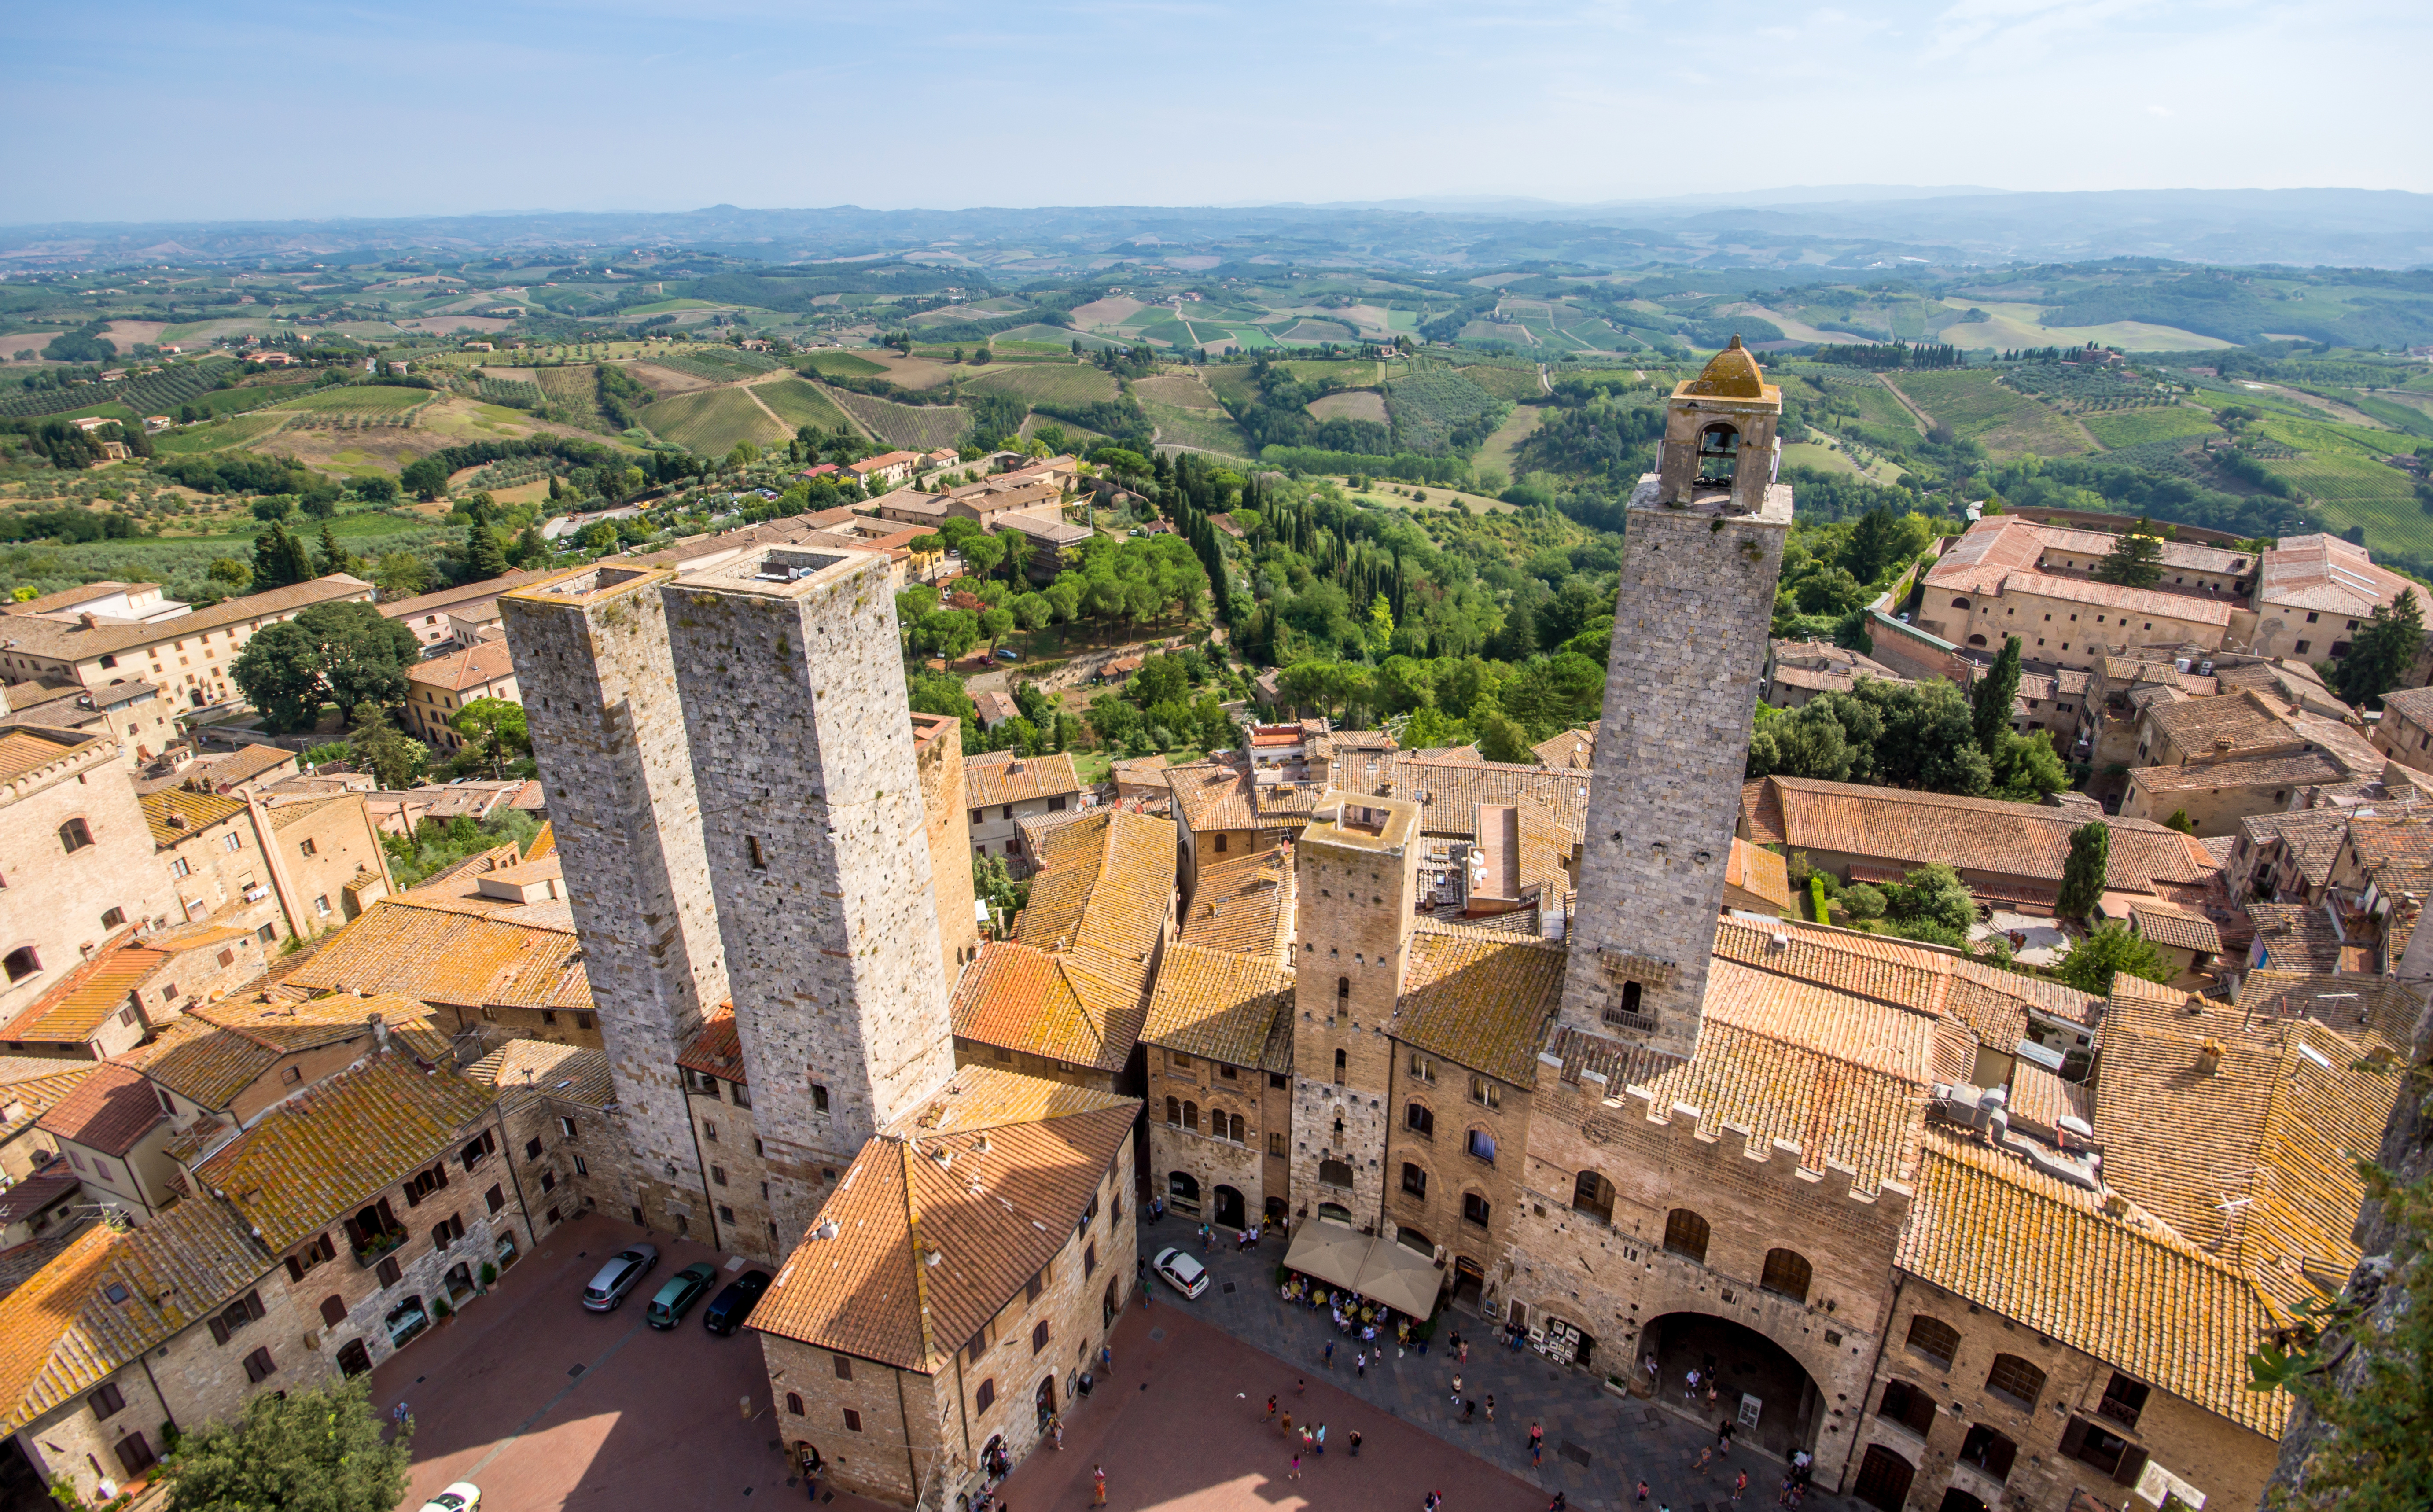 Road trip in Tuscany: Florence, San Gimignano, Pisa and Lucca